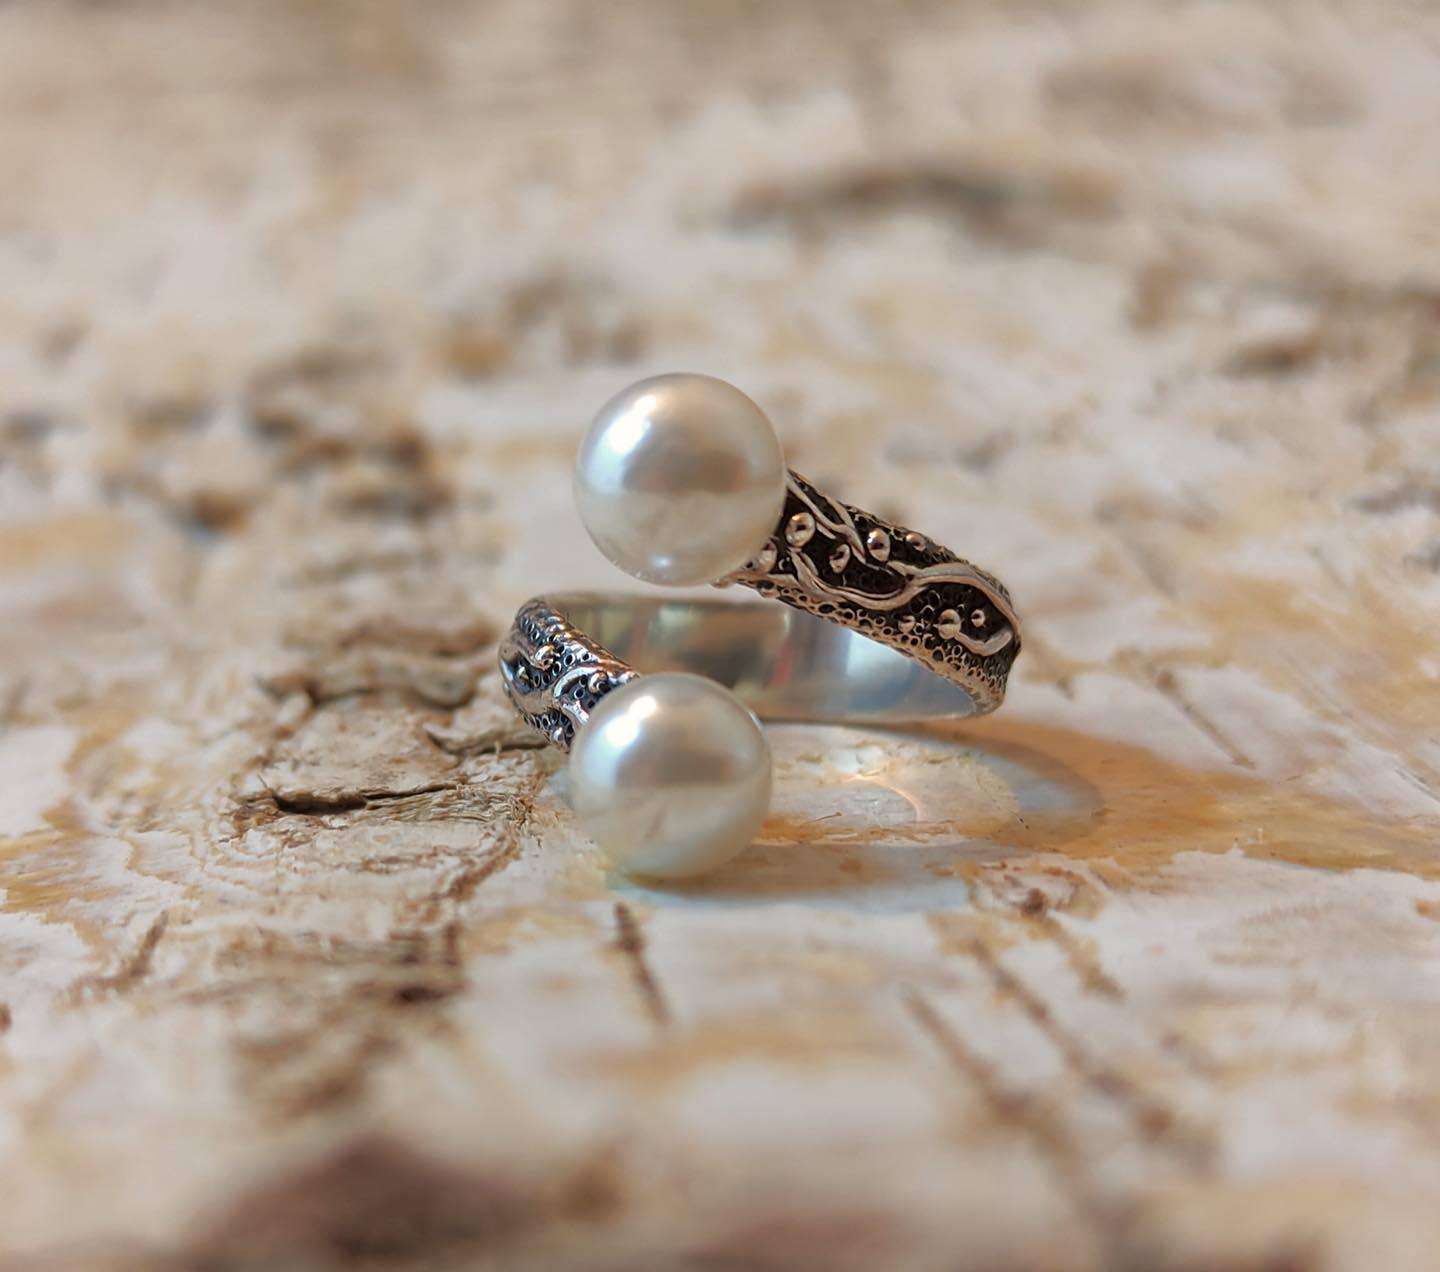 Chstik Silver Ring with Pearl